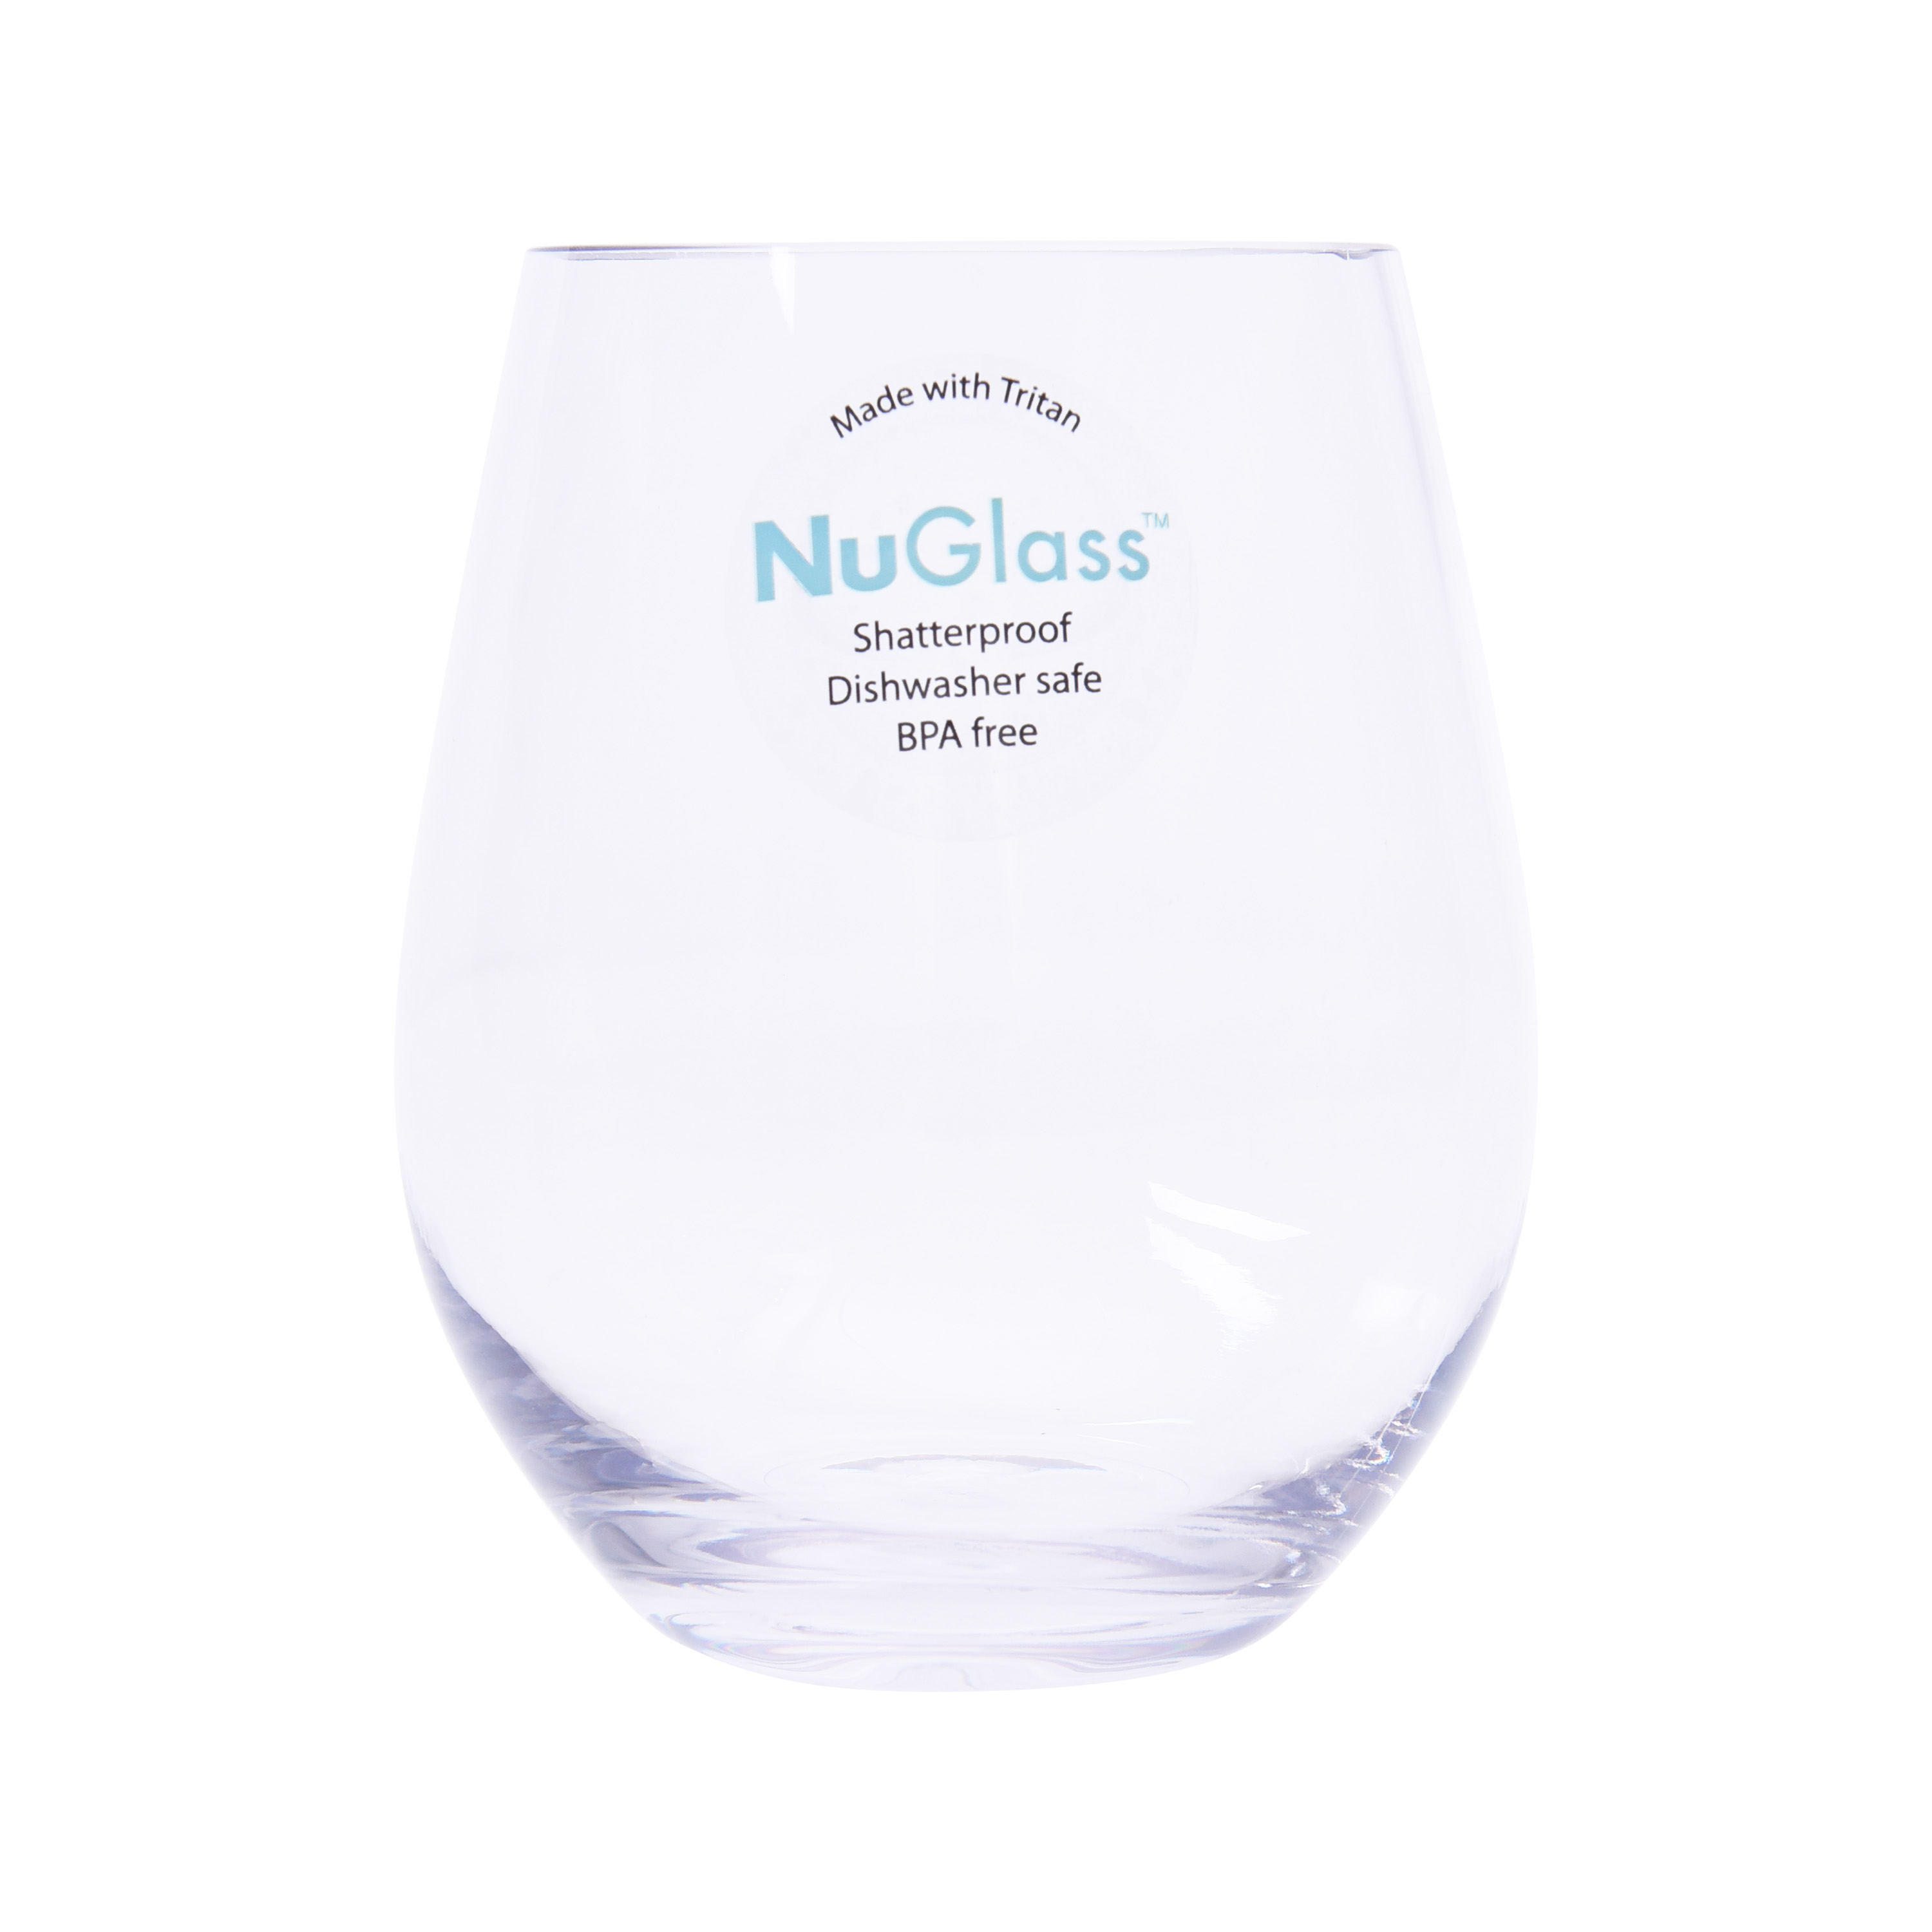 Better Homes & Gardens 19-Ounce Tritan Nuglass Stemless Wine Glass, Clear Shatter Resistant - image 1 of 5